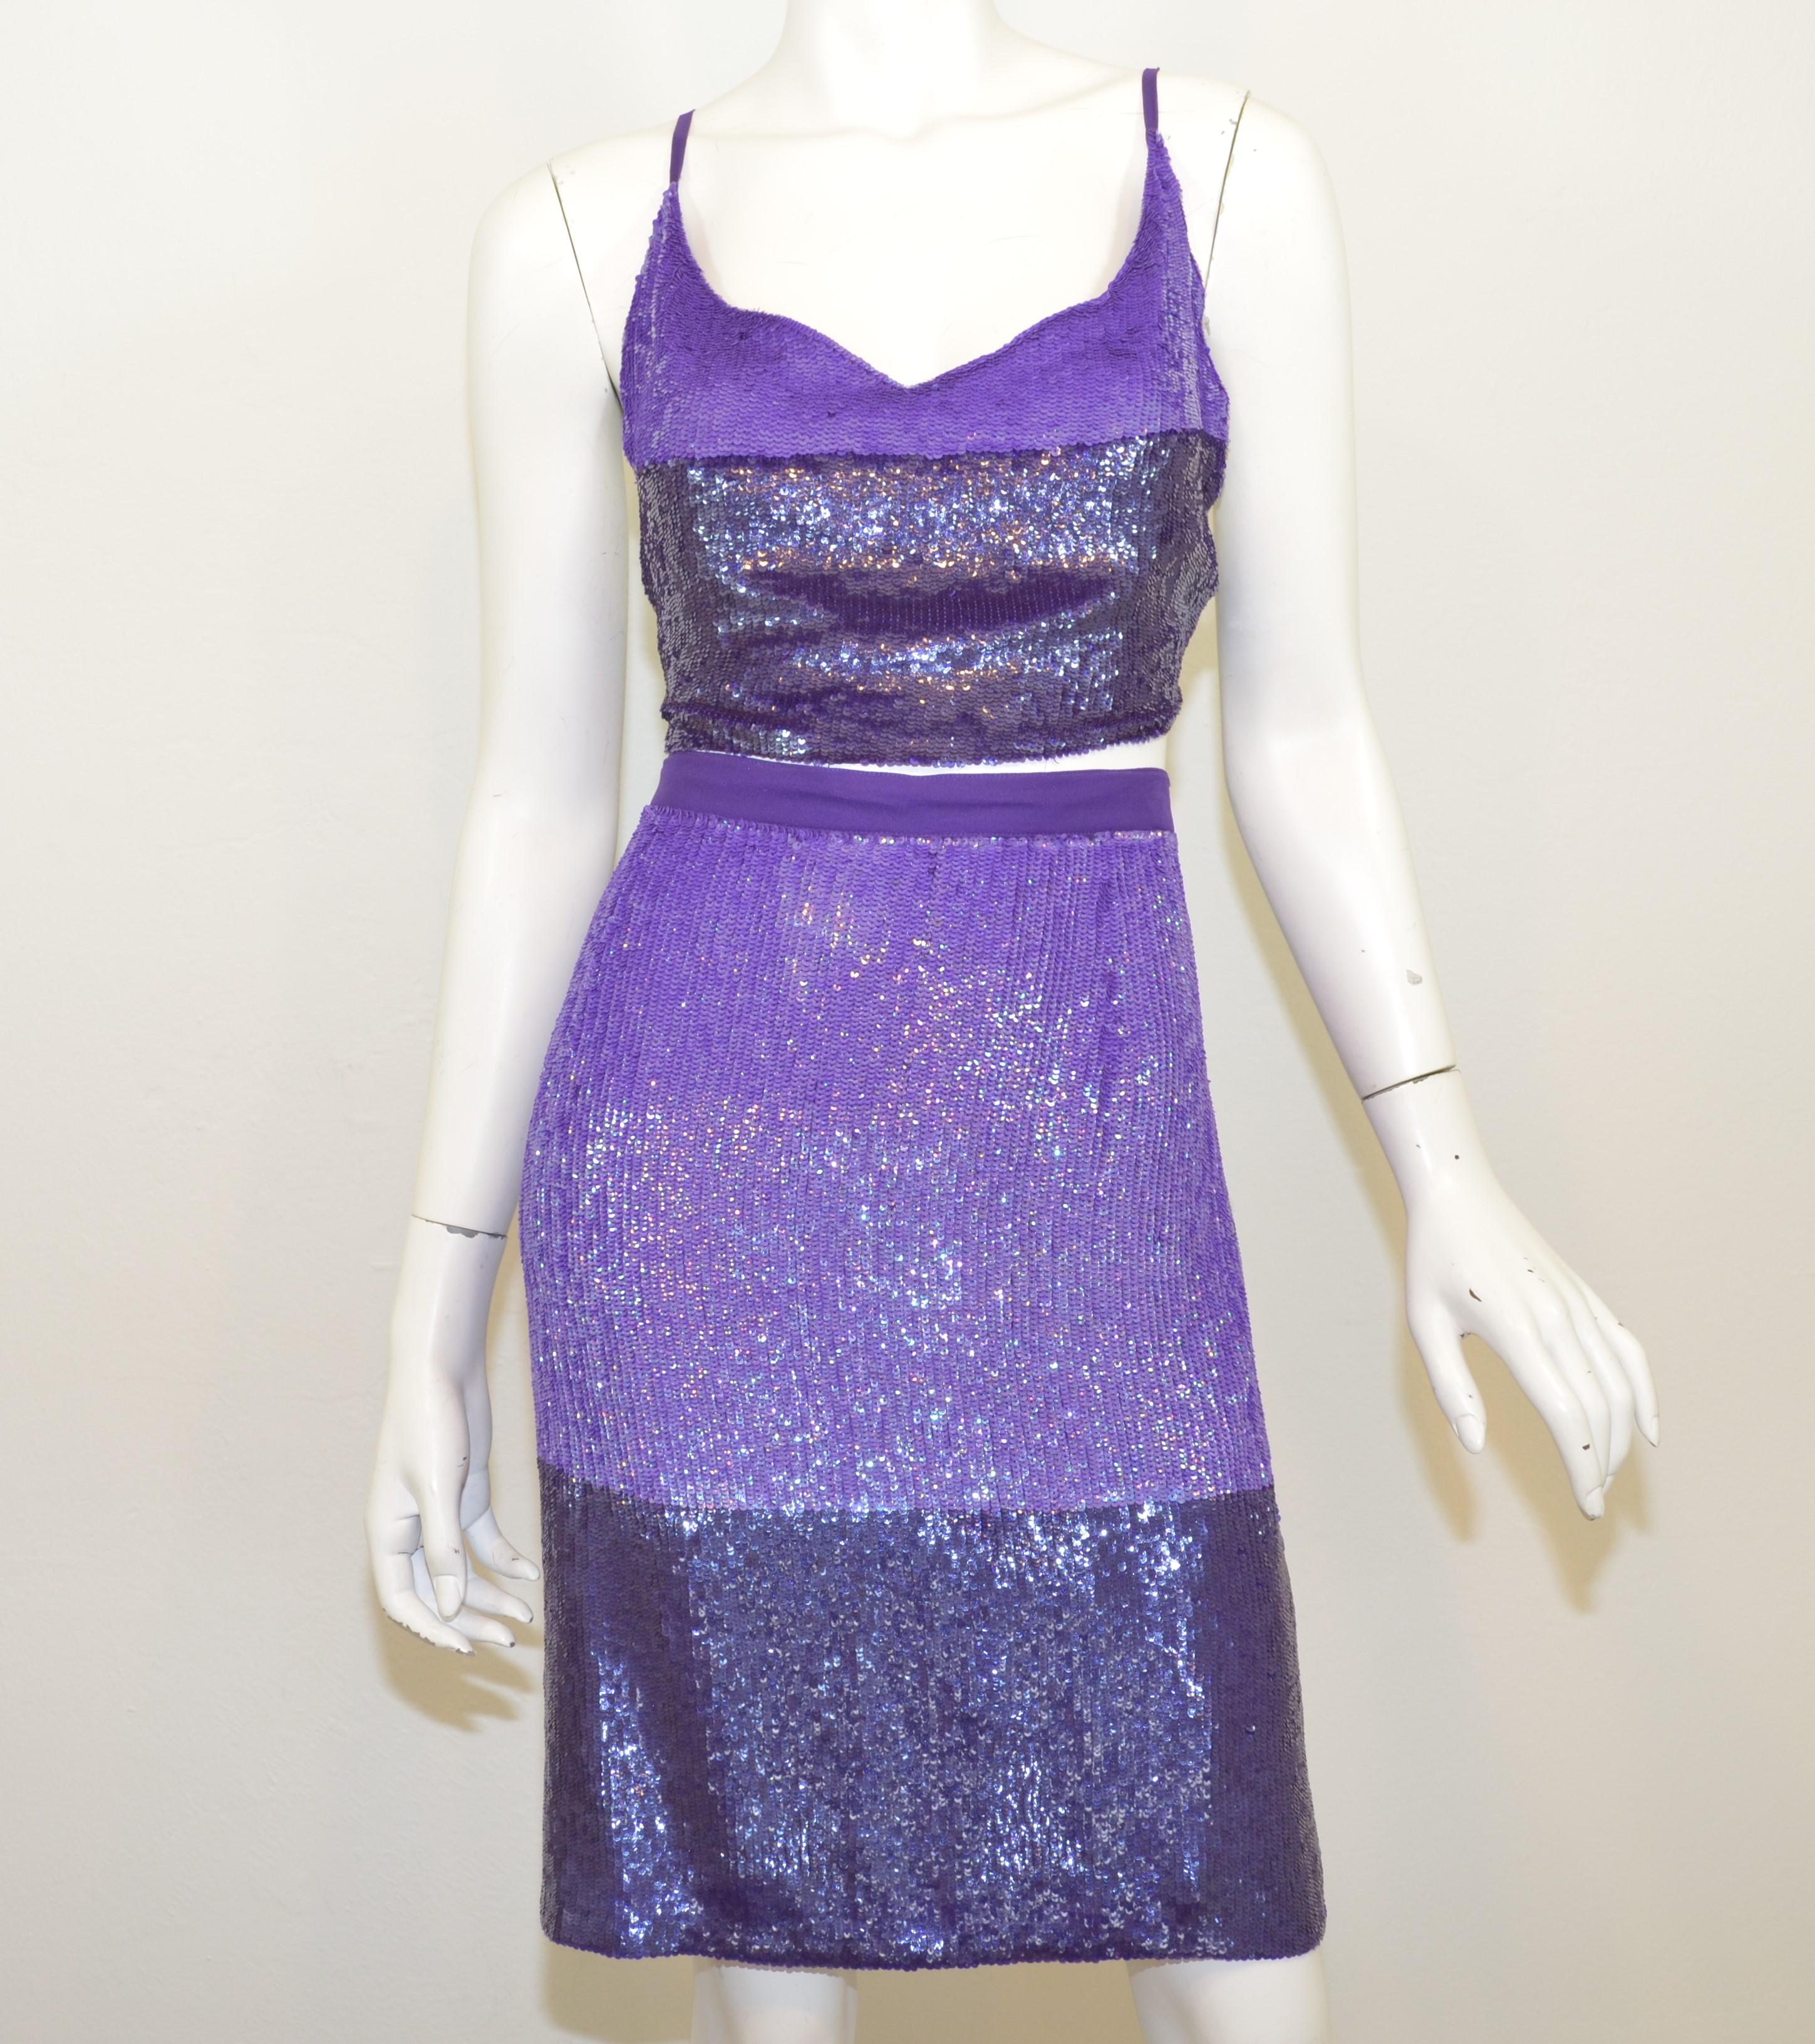 Gianfranco Ferre skirt set is featured in purple and fully-embellished in sequins. Skirt has a back zipper and hook-and-eye fastening at the back. Top has an open back with a tie closure and can be adjustable.

Measurements:

Top - 22'' (back